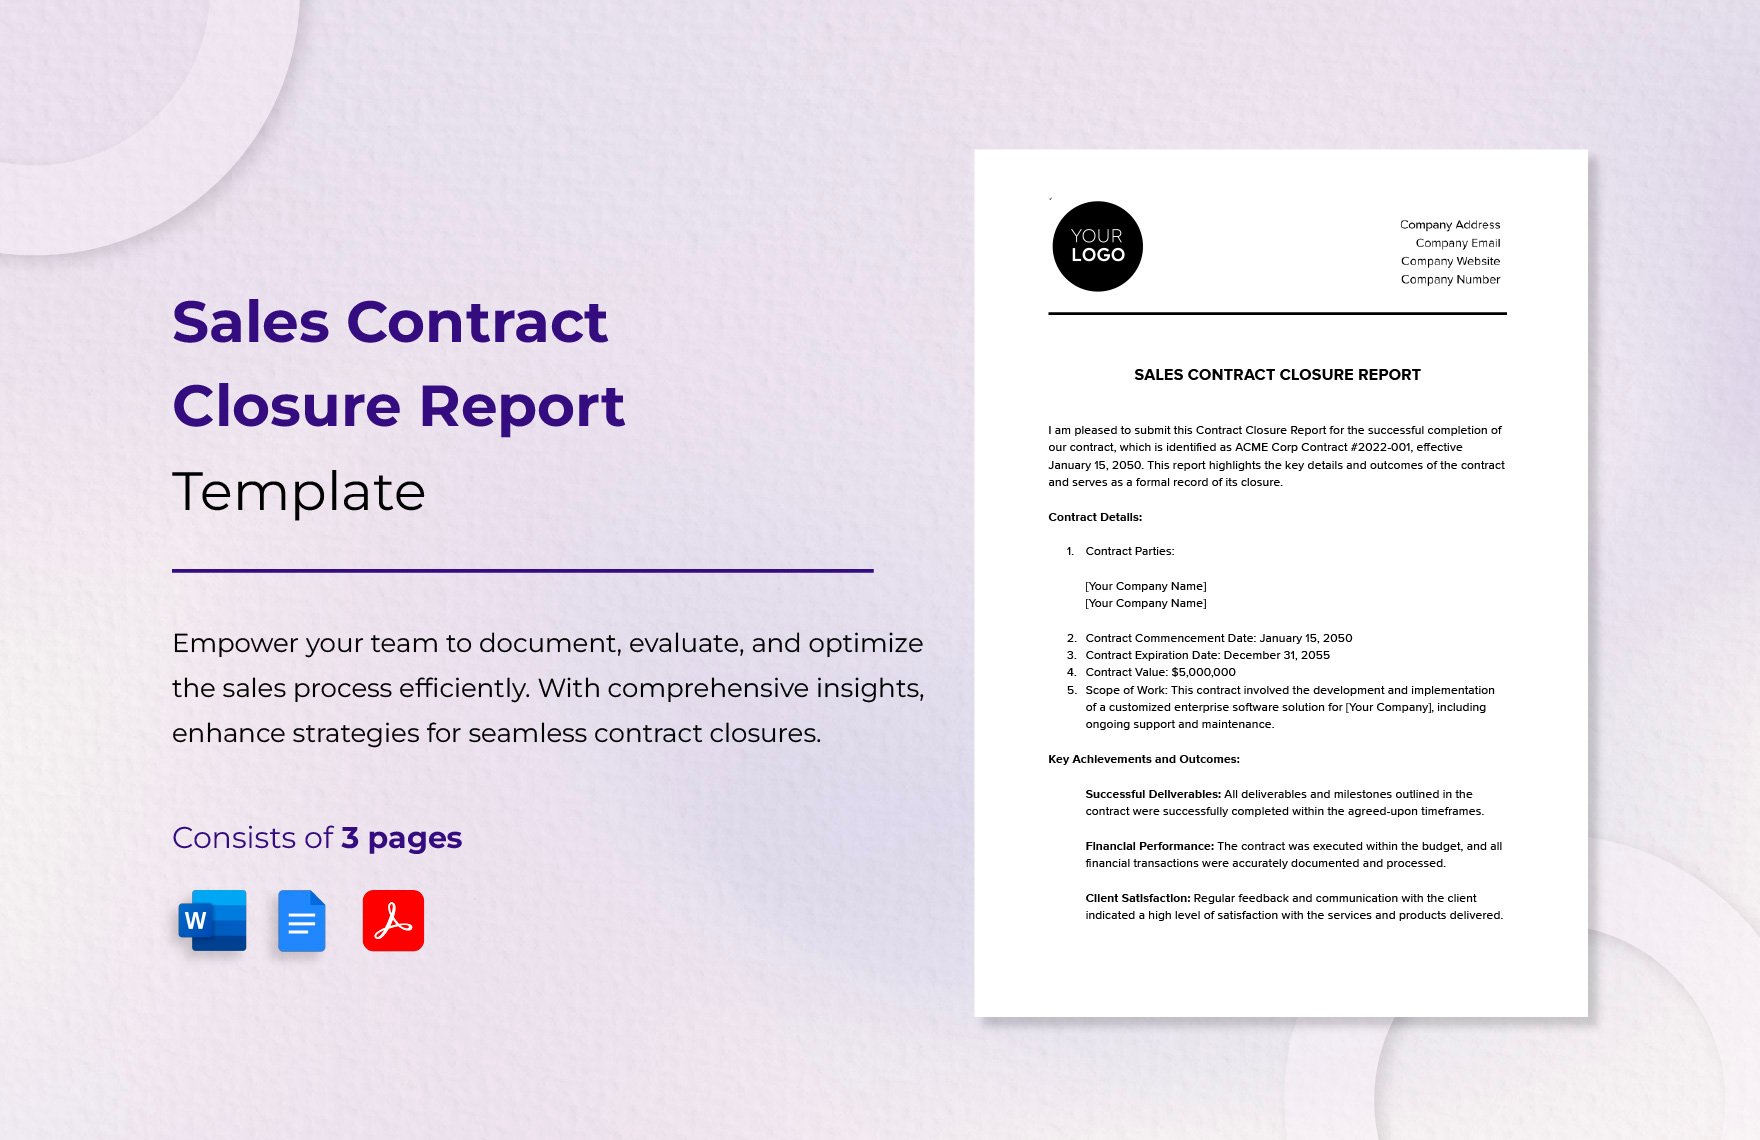 Sales Contract Closure Report Template